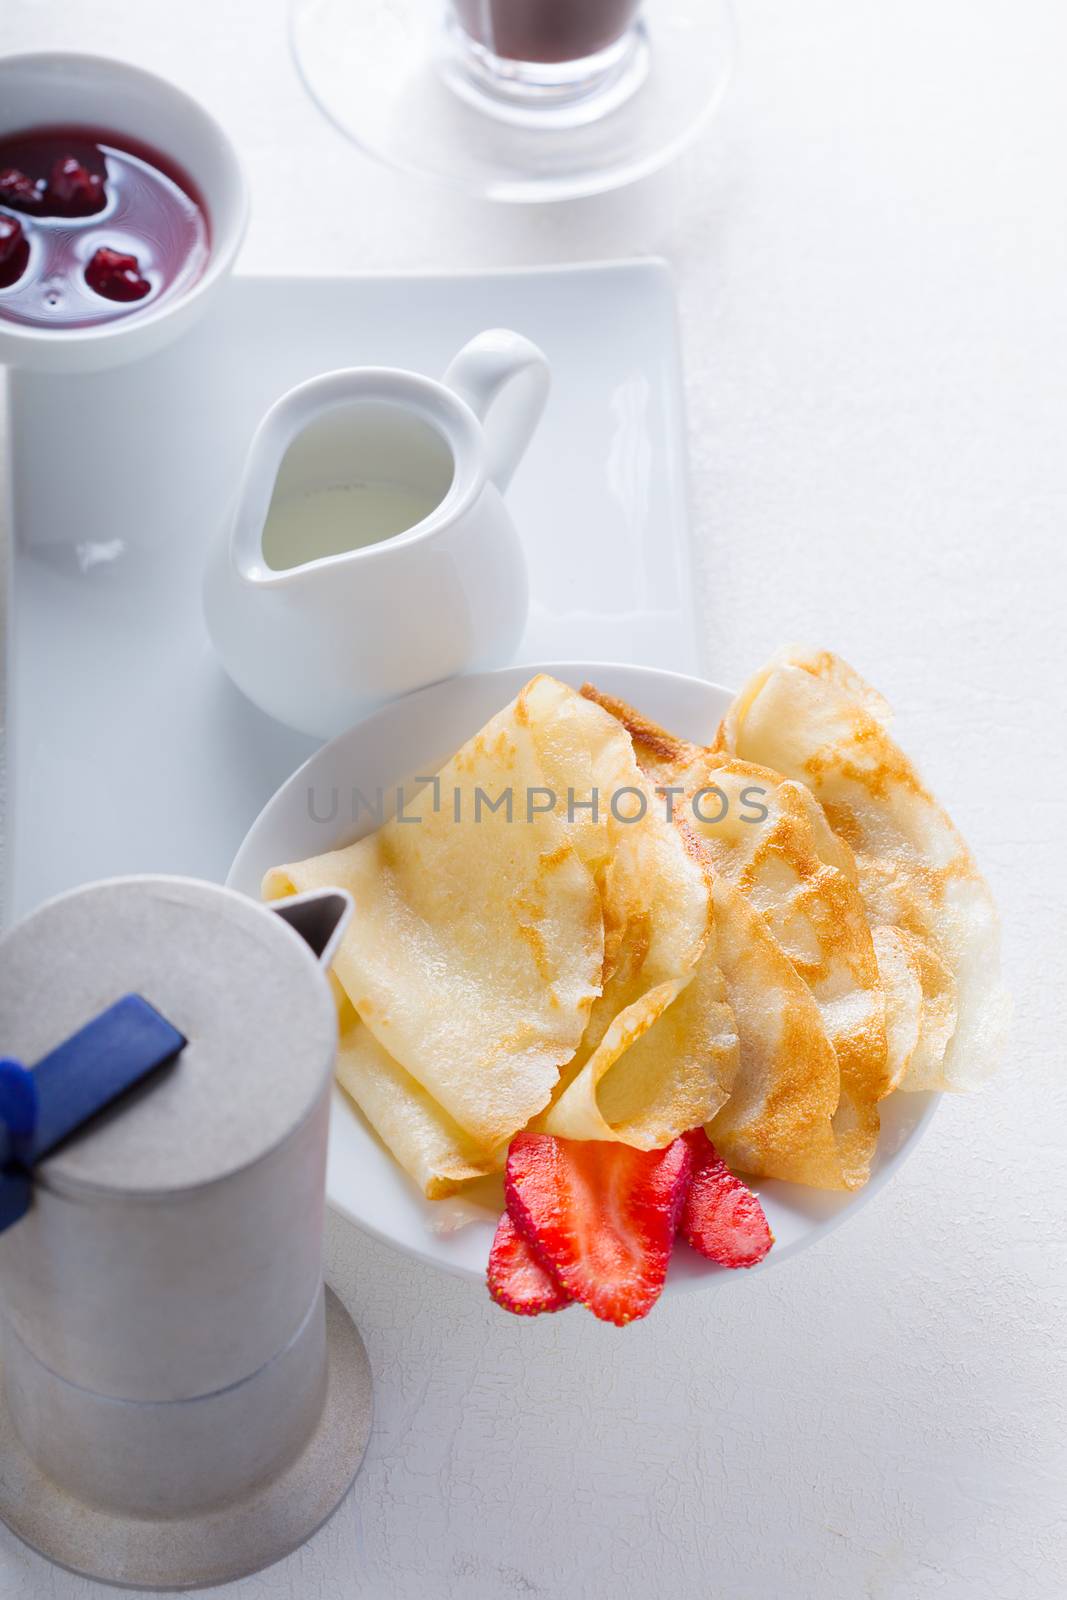 Crepes with strawberries and coffee by supercat67